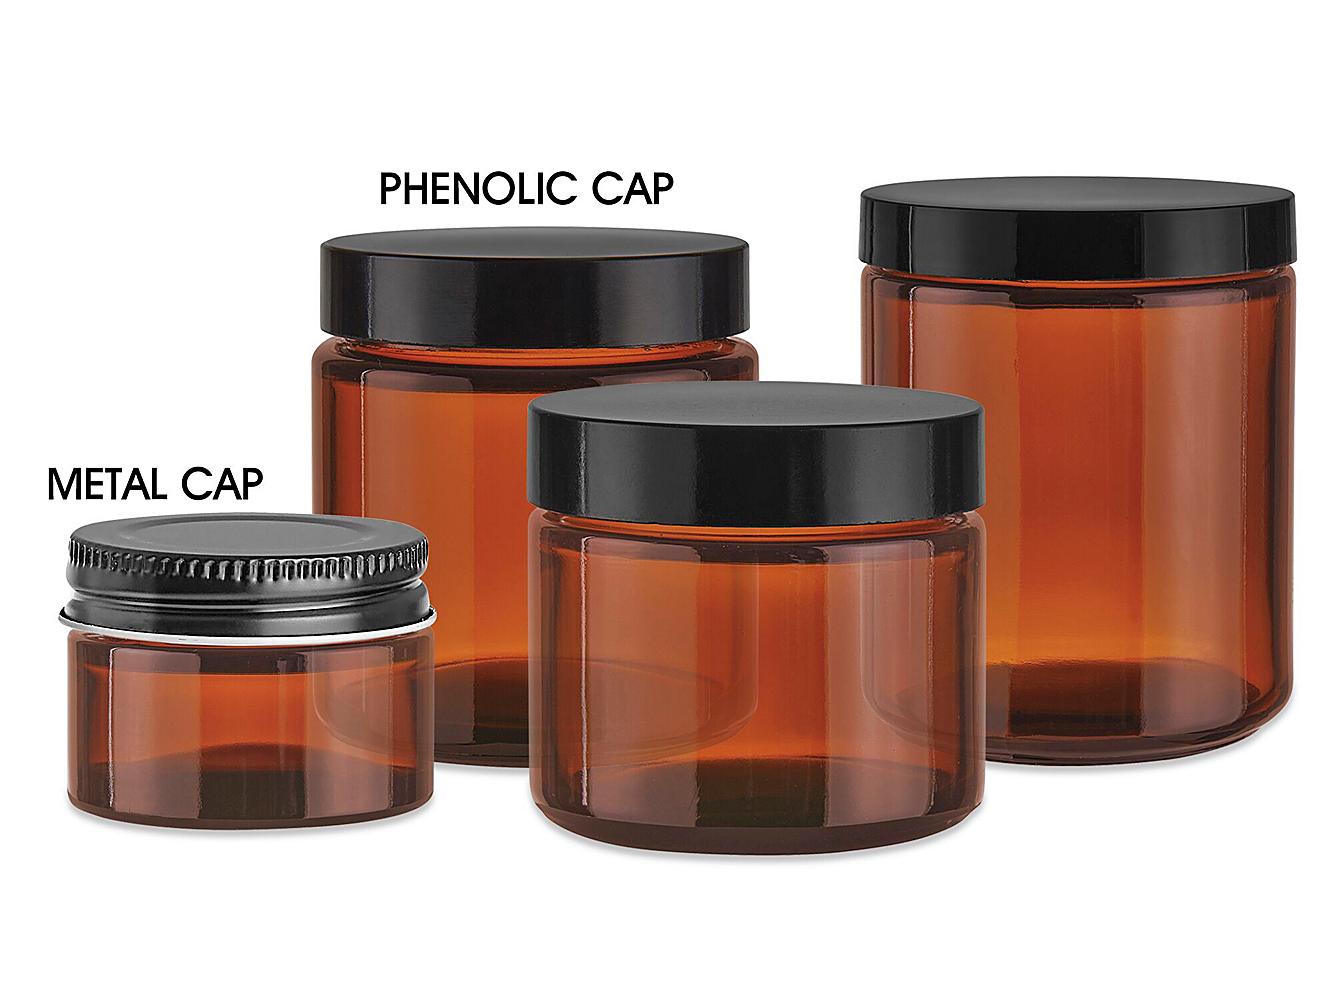 Straight Sided 8 oz. Amber Glass Candle/Salve Jar per case/24